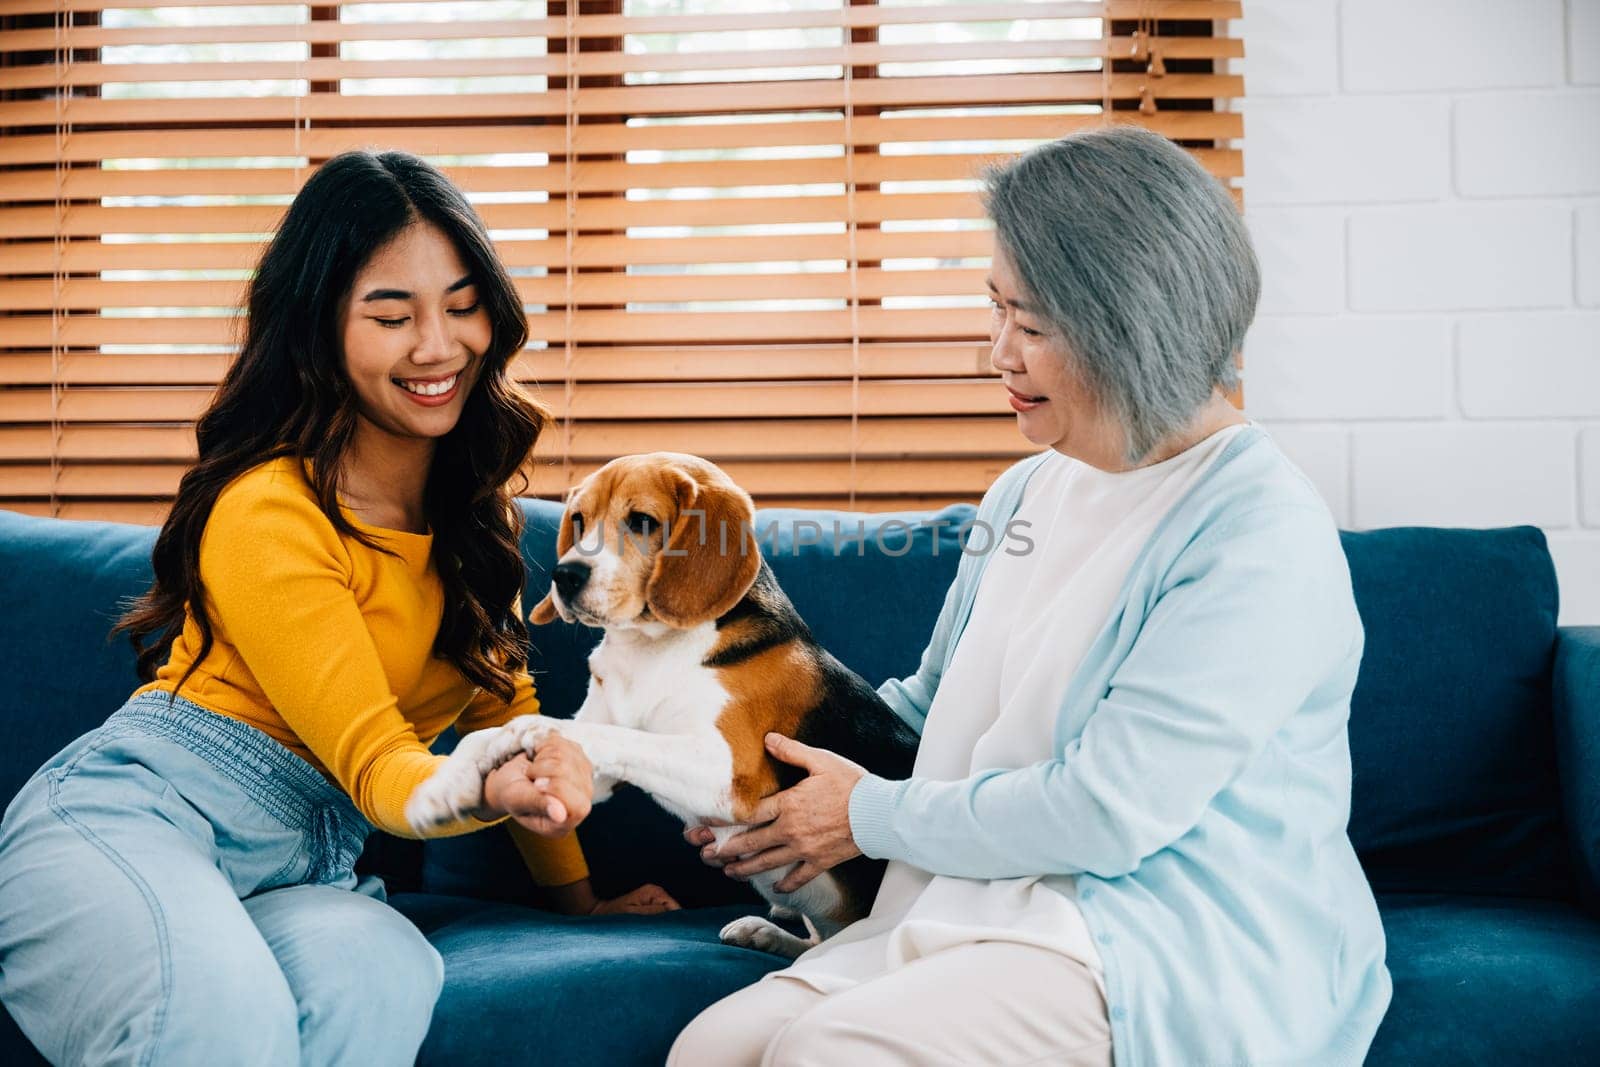 A woman and her mother, along with their Beagle dog, capture a heartwarming family portrait on the sofa at home. Their togetherness and loving bond bring happiness to their lives. Pet love by Sorapop